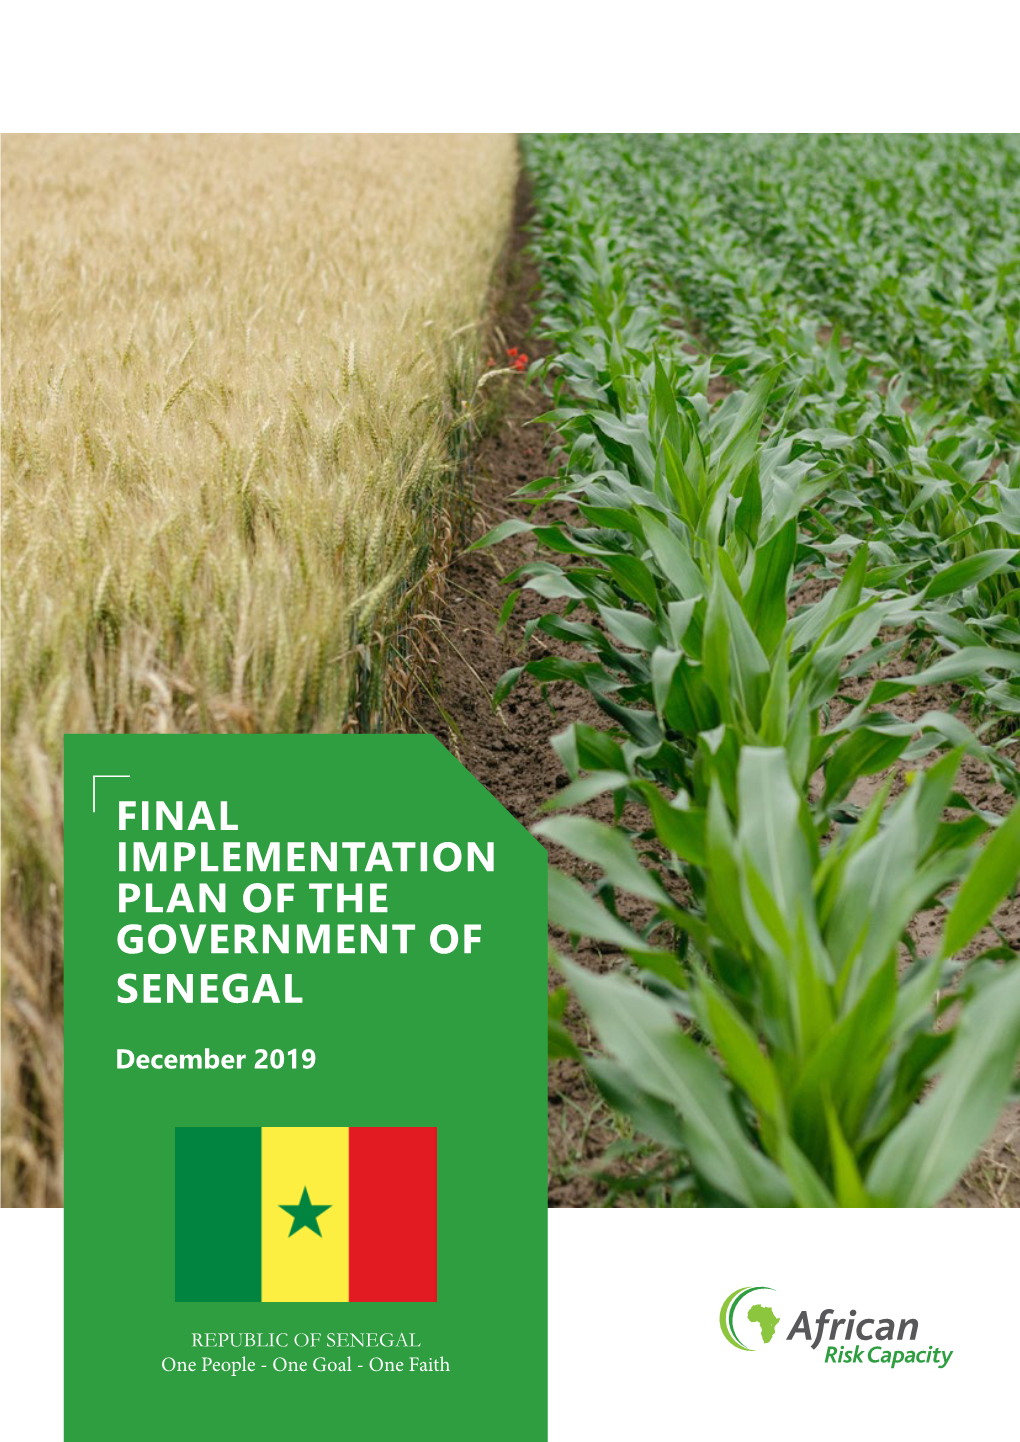 Final Implementation Plan of the Government of Senegal